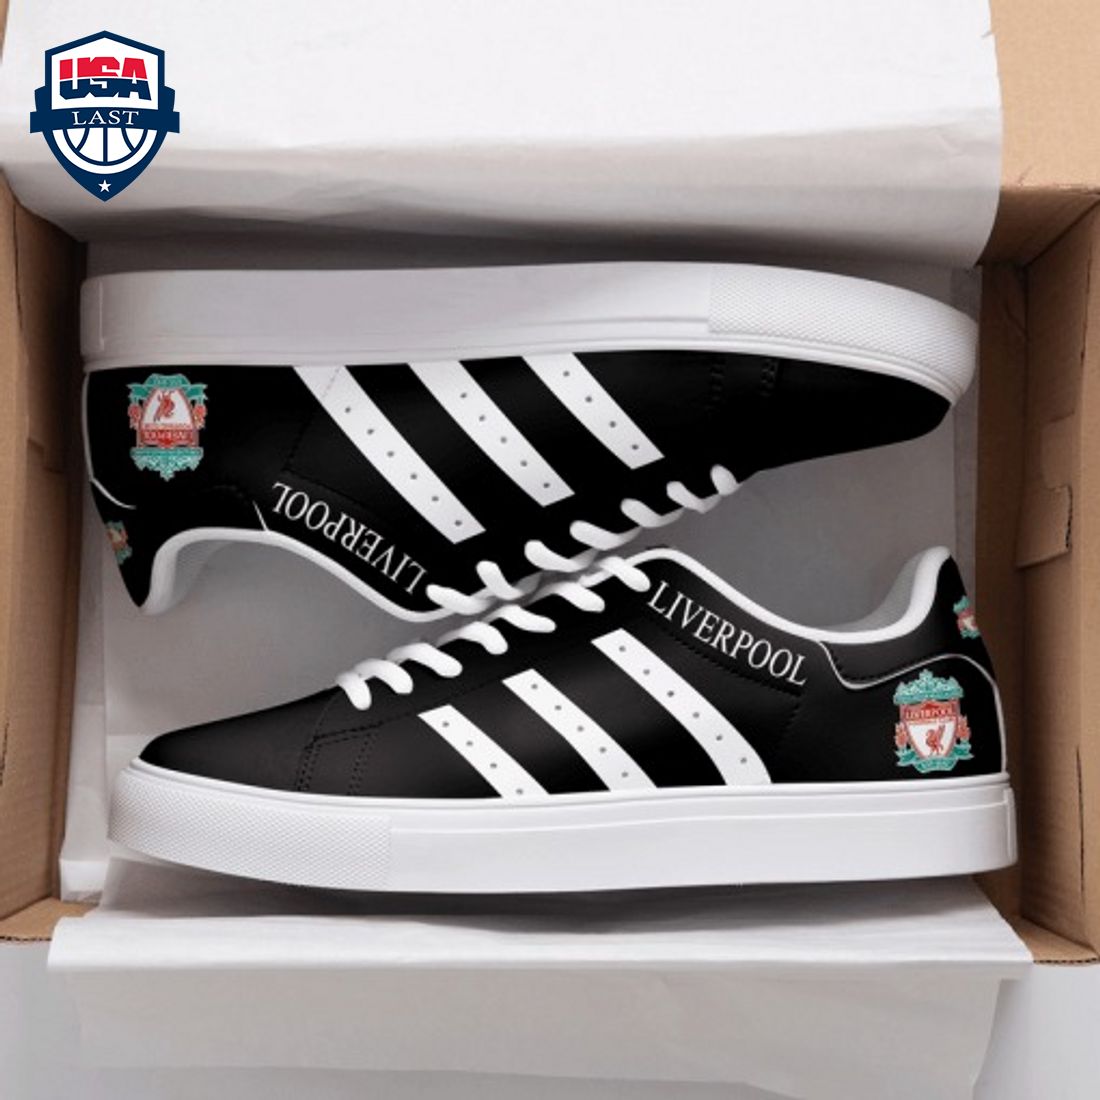 liverpool-fc-white-stripes-style-1-stan-smith-low-top-shoes-1-On0MV.jpg